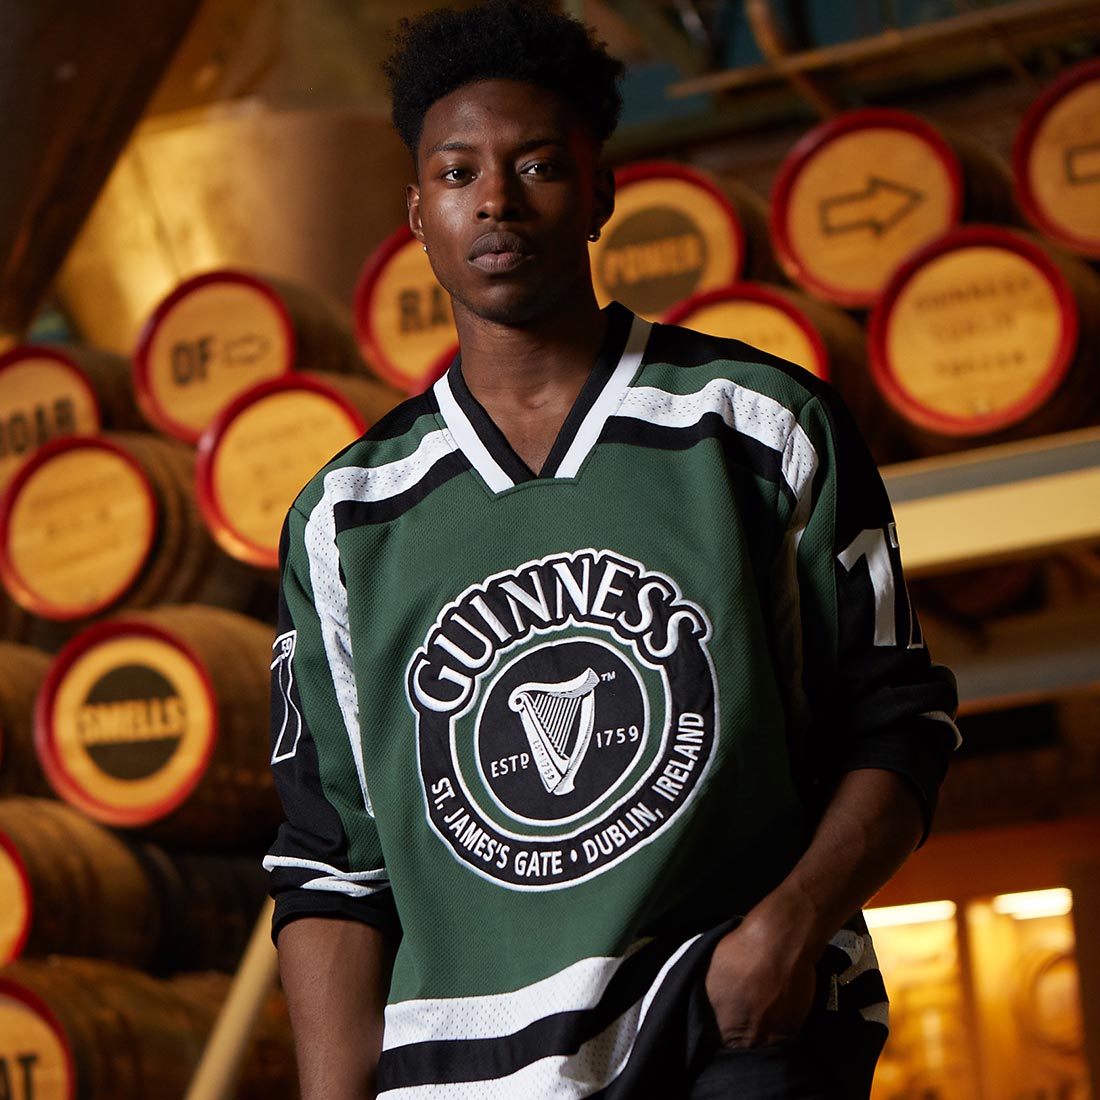 A young man wearing a Guinness UK HARP Hockey Jersey made of polyester.